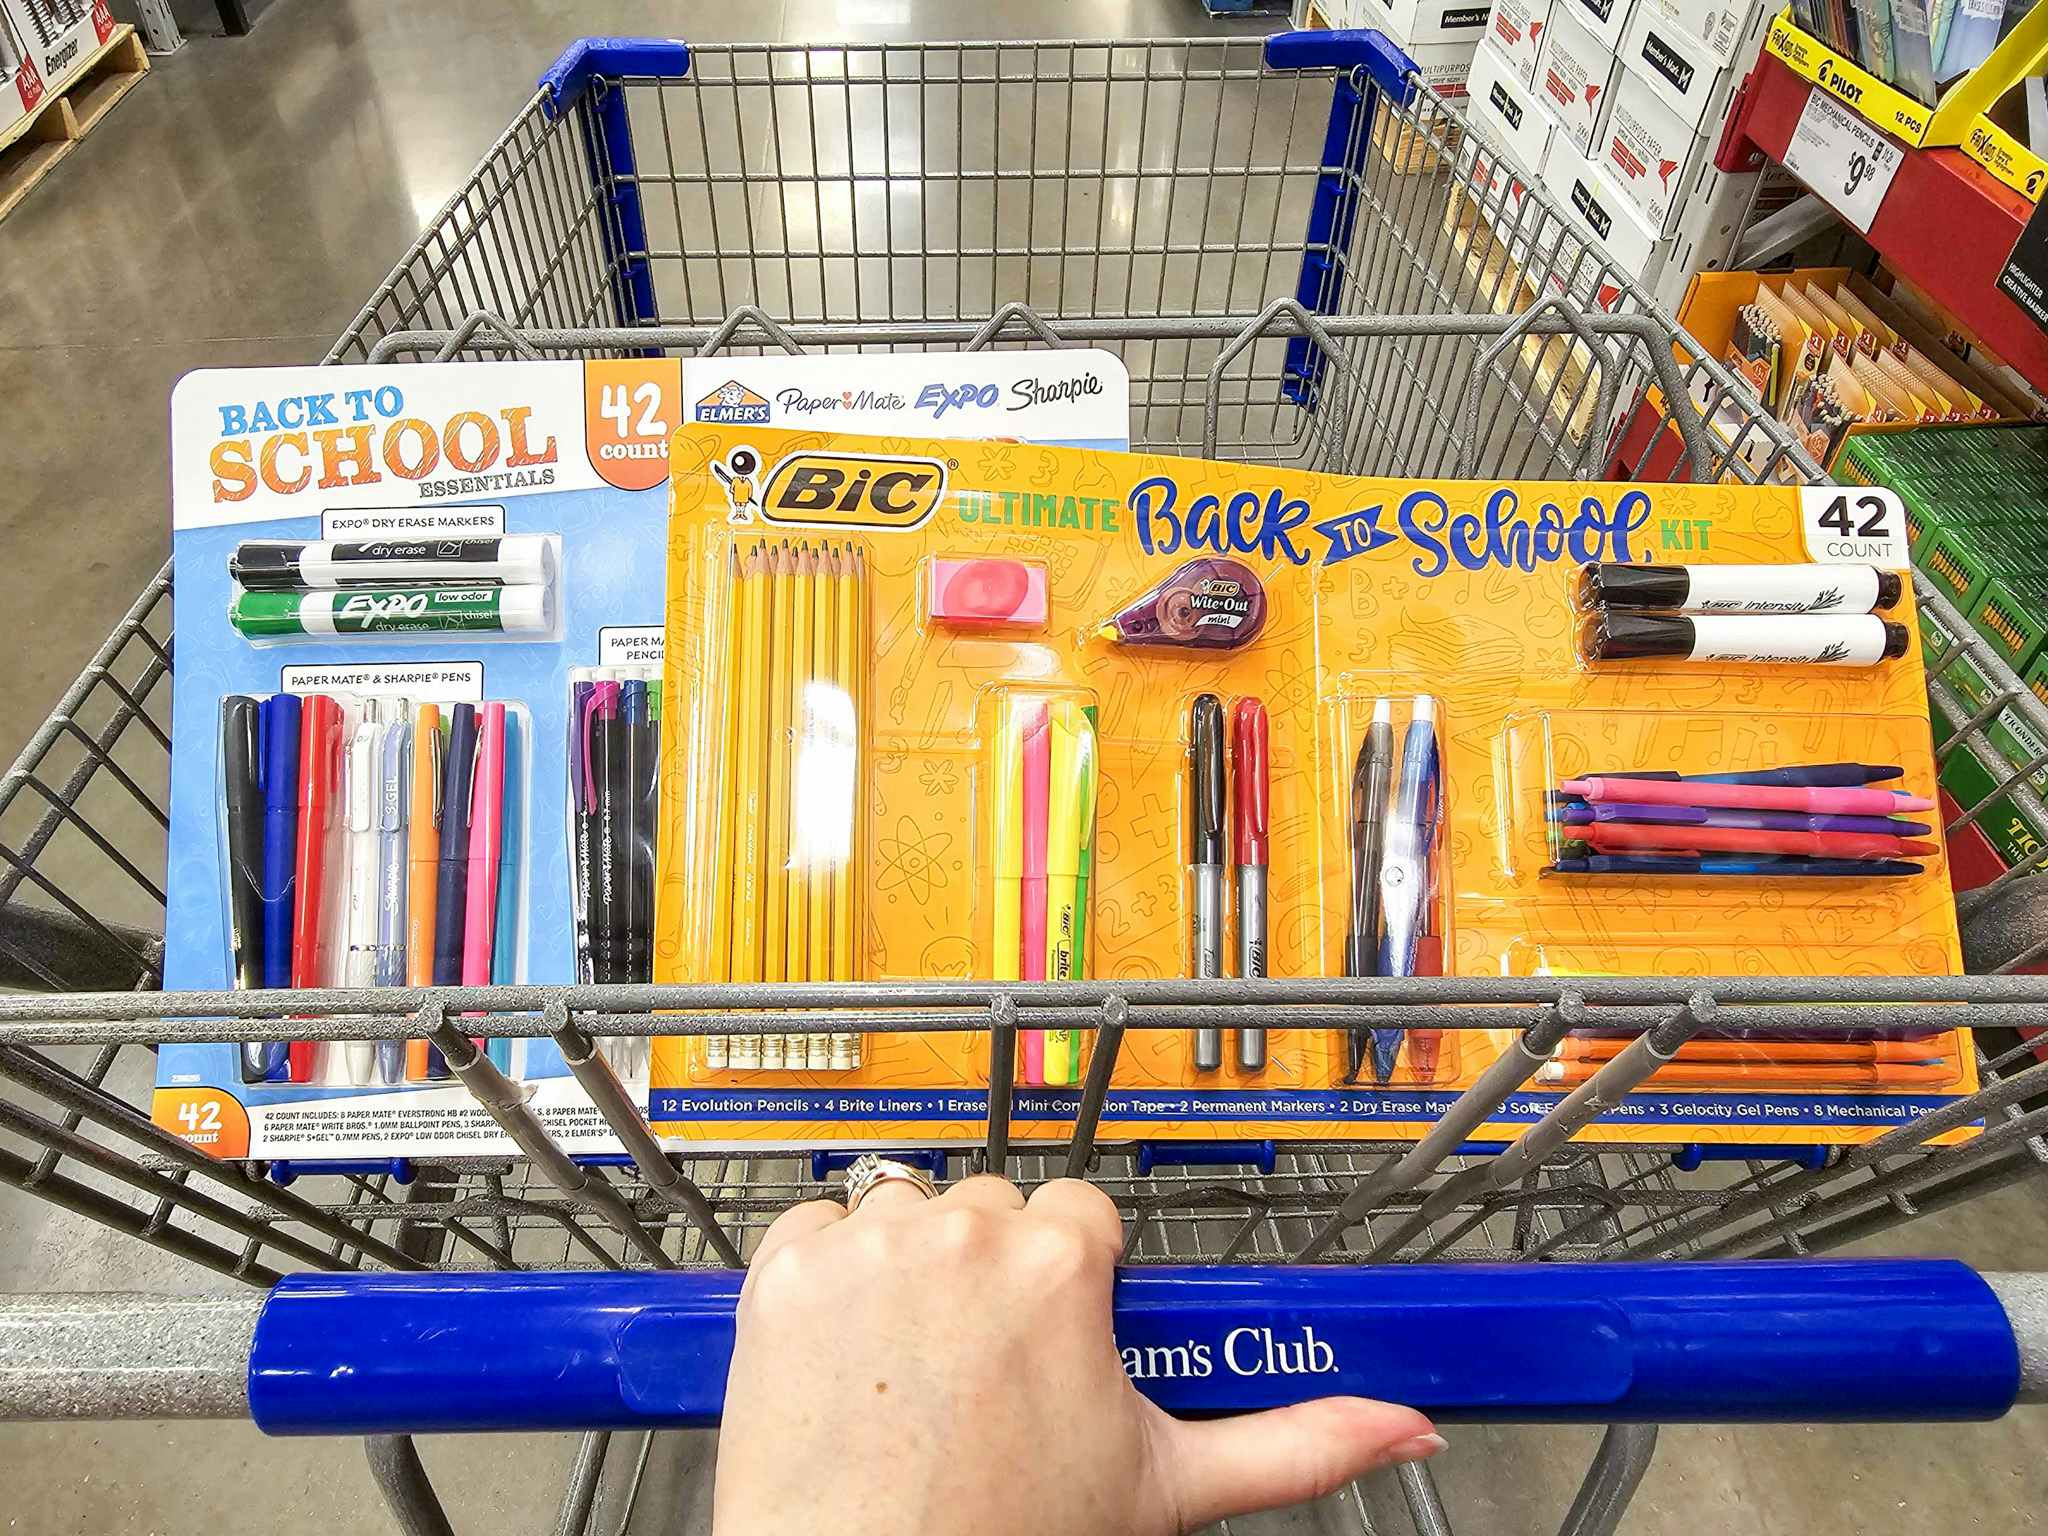 back to school supply kits in a cart